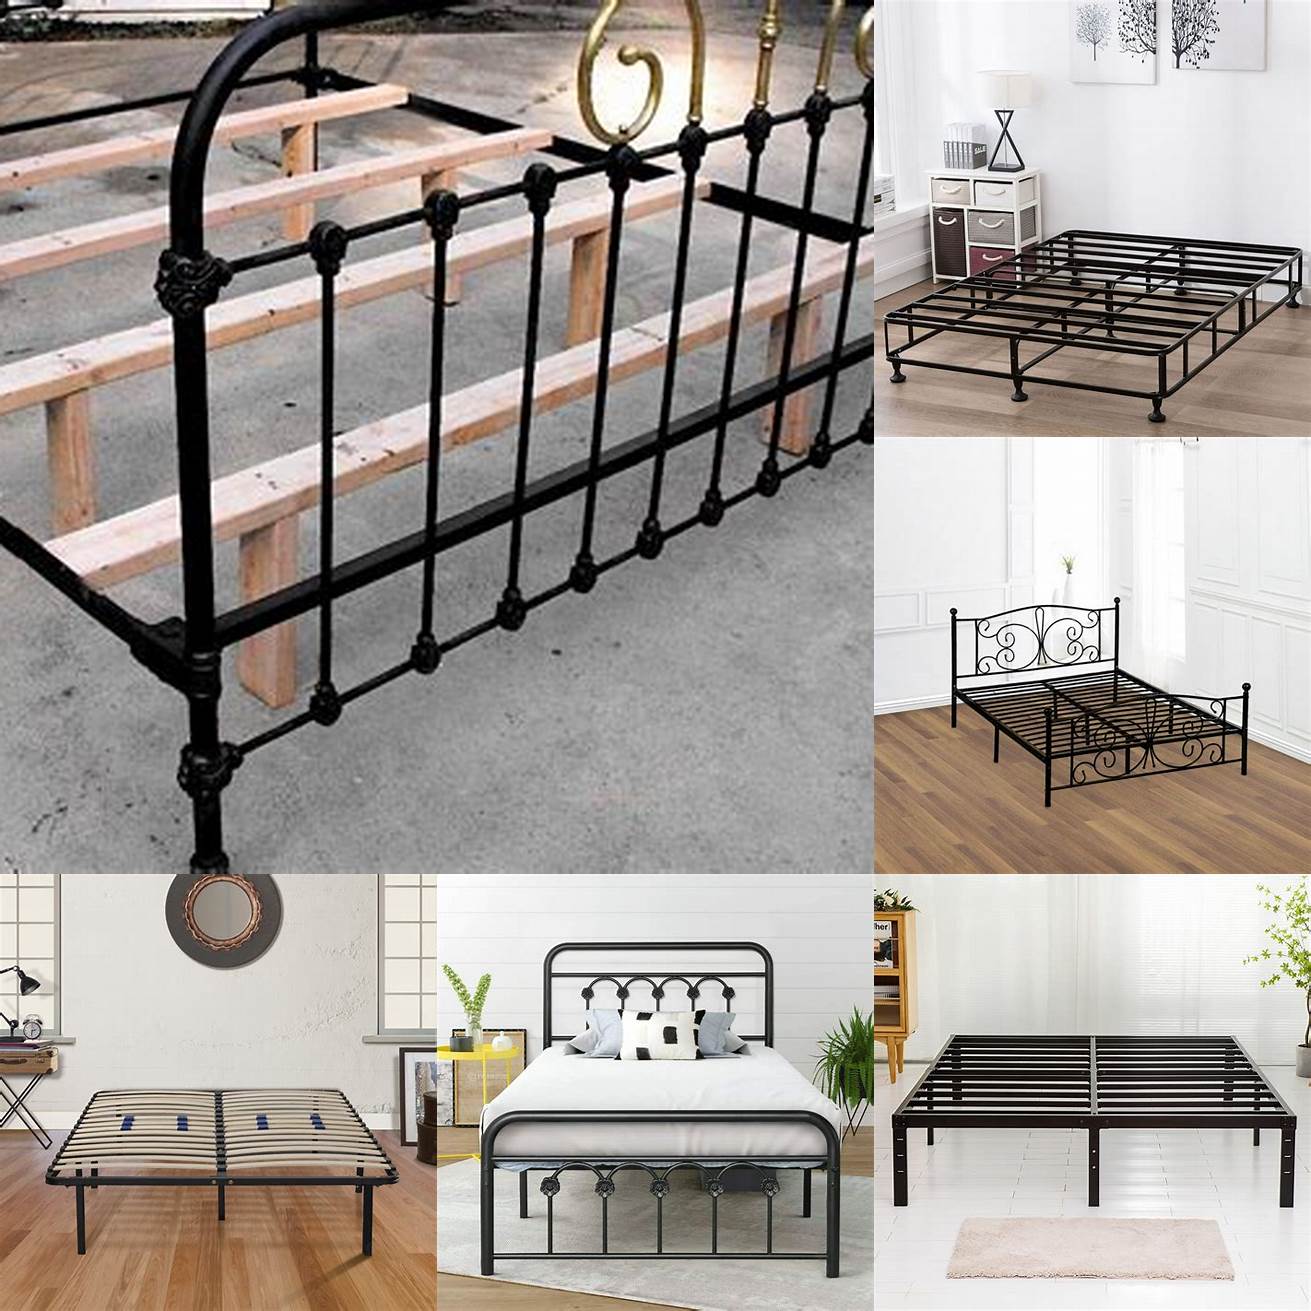 Support Iron bed frames provide excellent support for your mattress and box spring